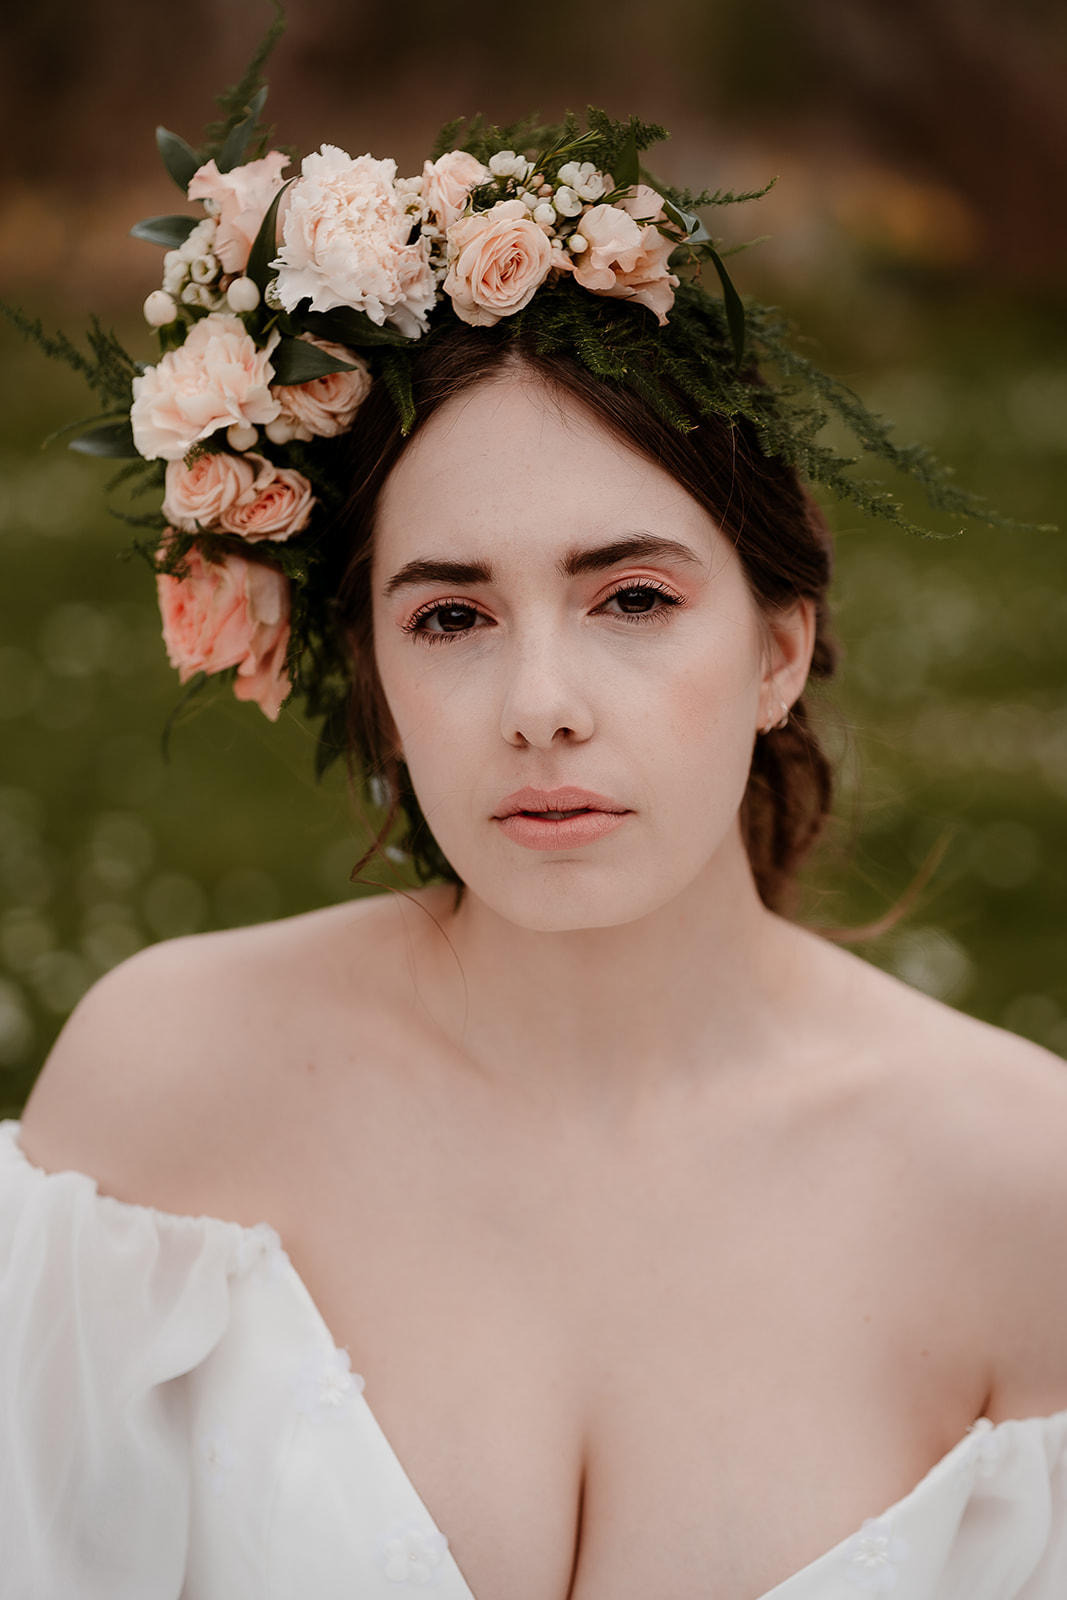 portrait of a bride wearing a flower crown and off the shoulder wedding dress with puff sleeves